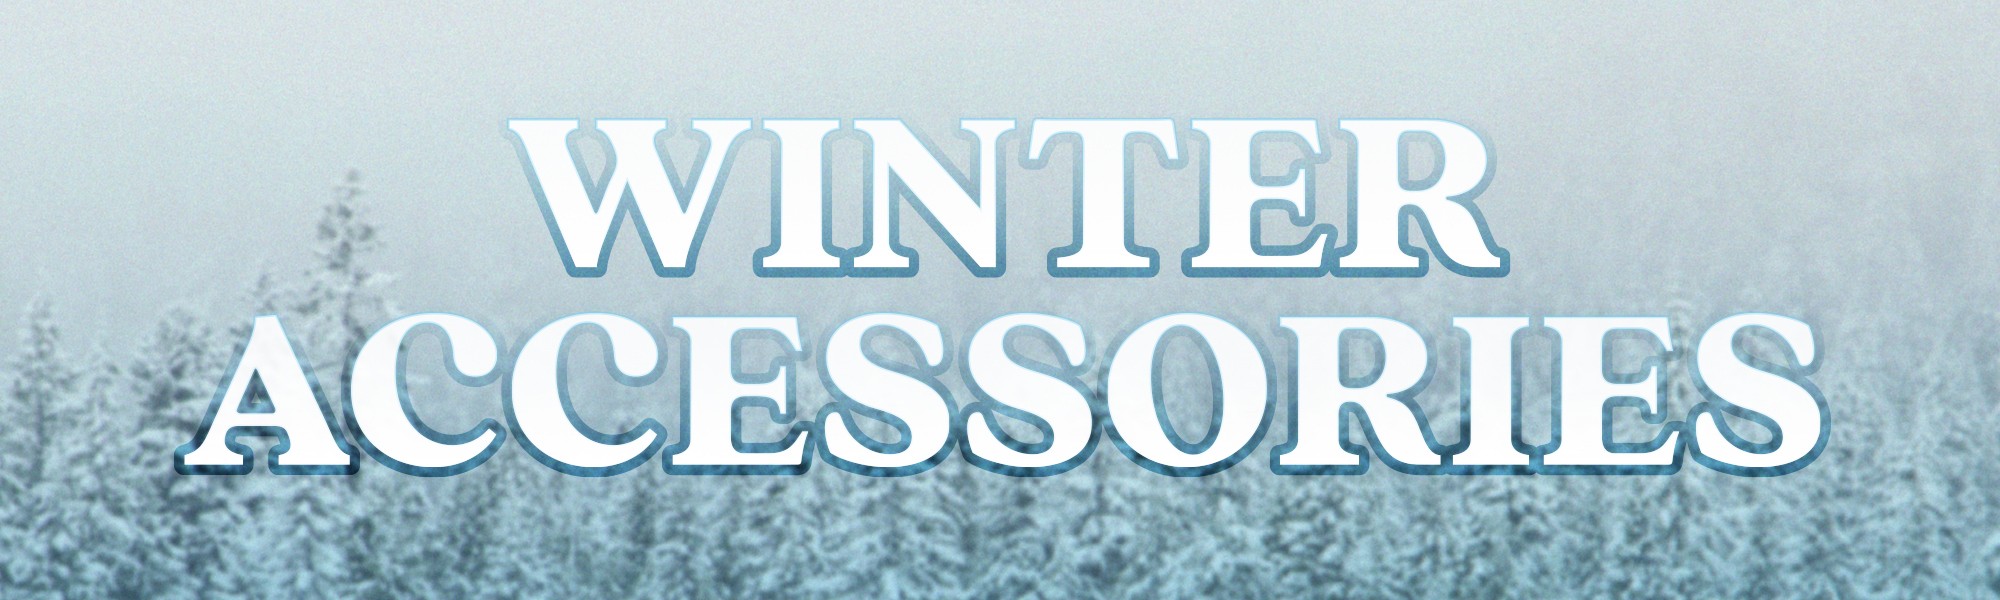 A graphic with trees and snow and the words "Winter Accessories"